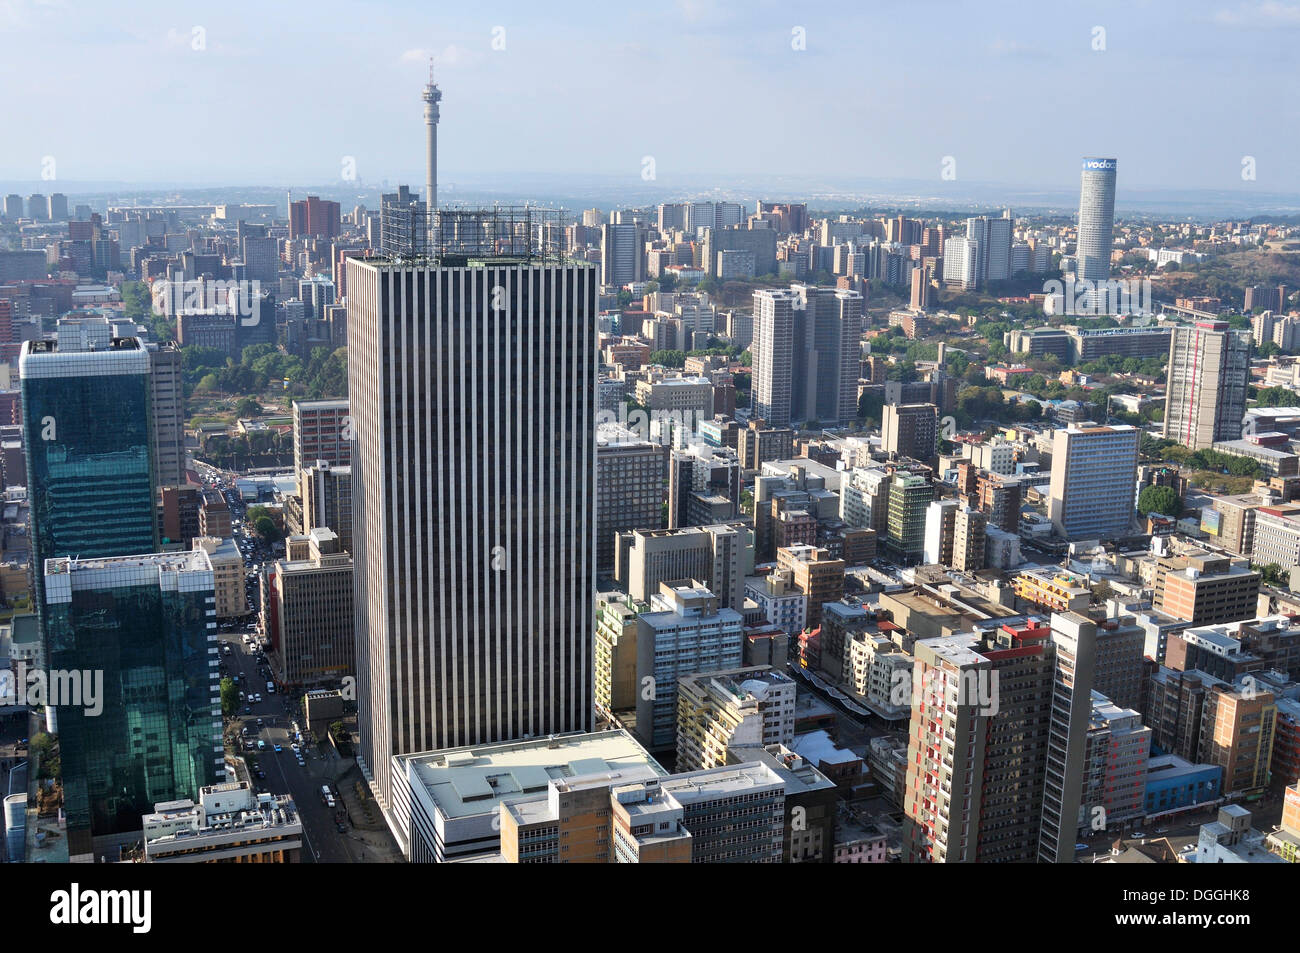 View over Johannesburg from the terrace of the Carlton Centre, with a height of 220m the highest skyscraper in Africa Stock Photo